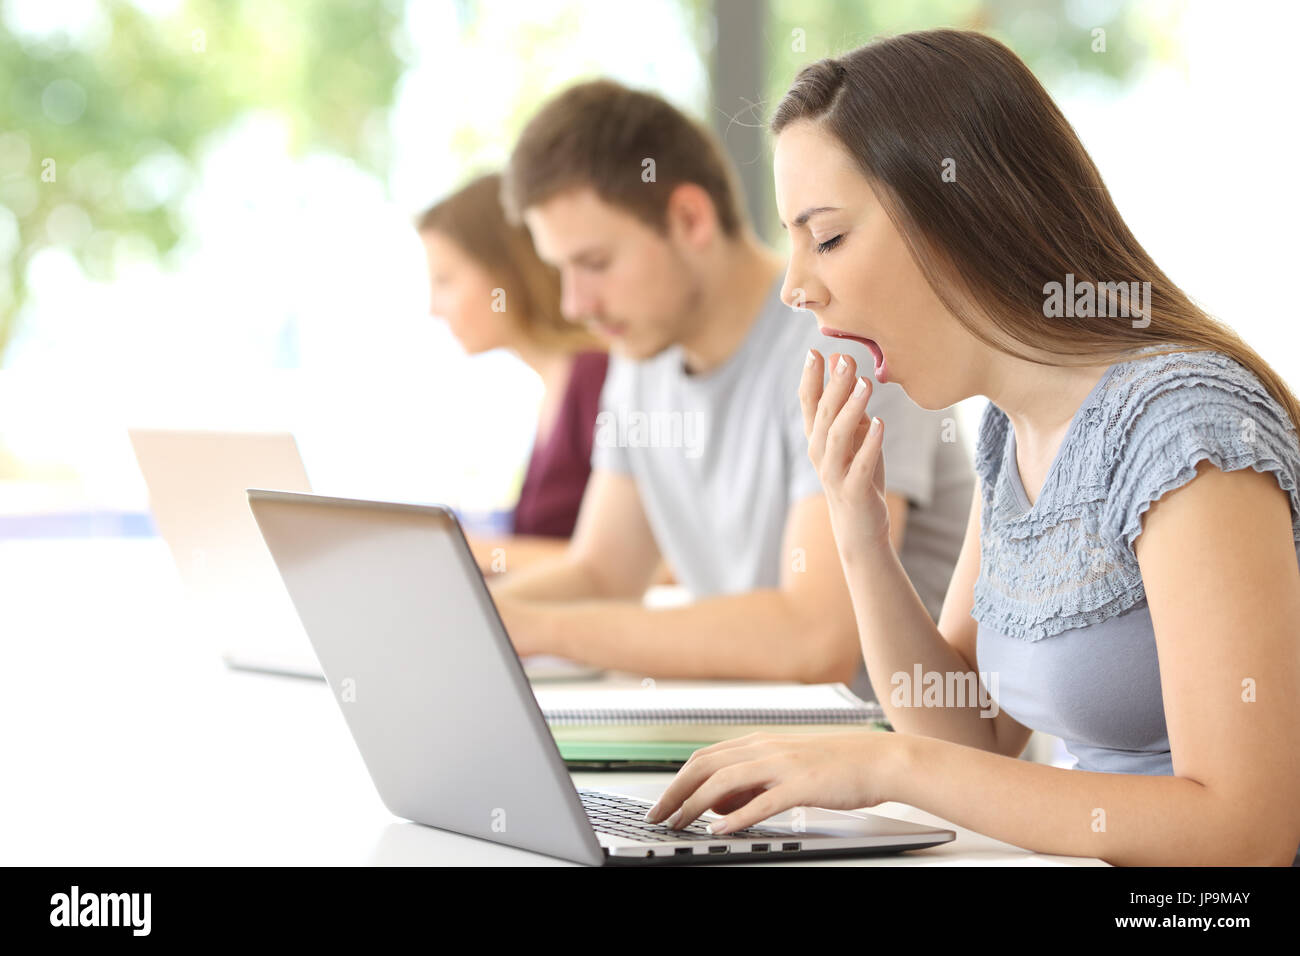 Side view of a tired student yawning using a laptop at classroom Stock Photo